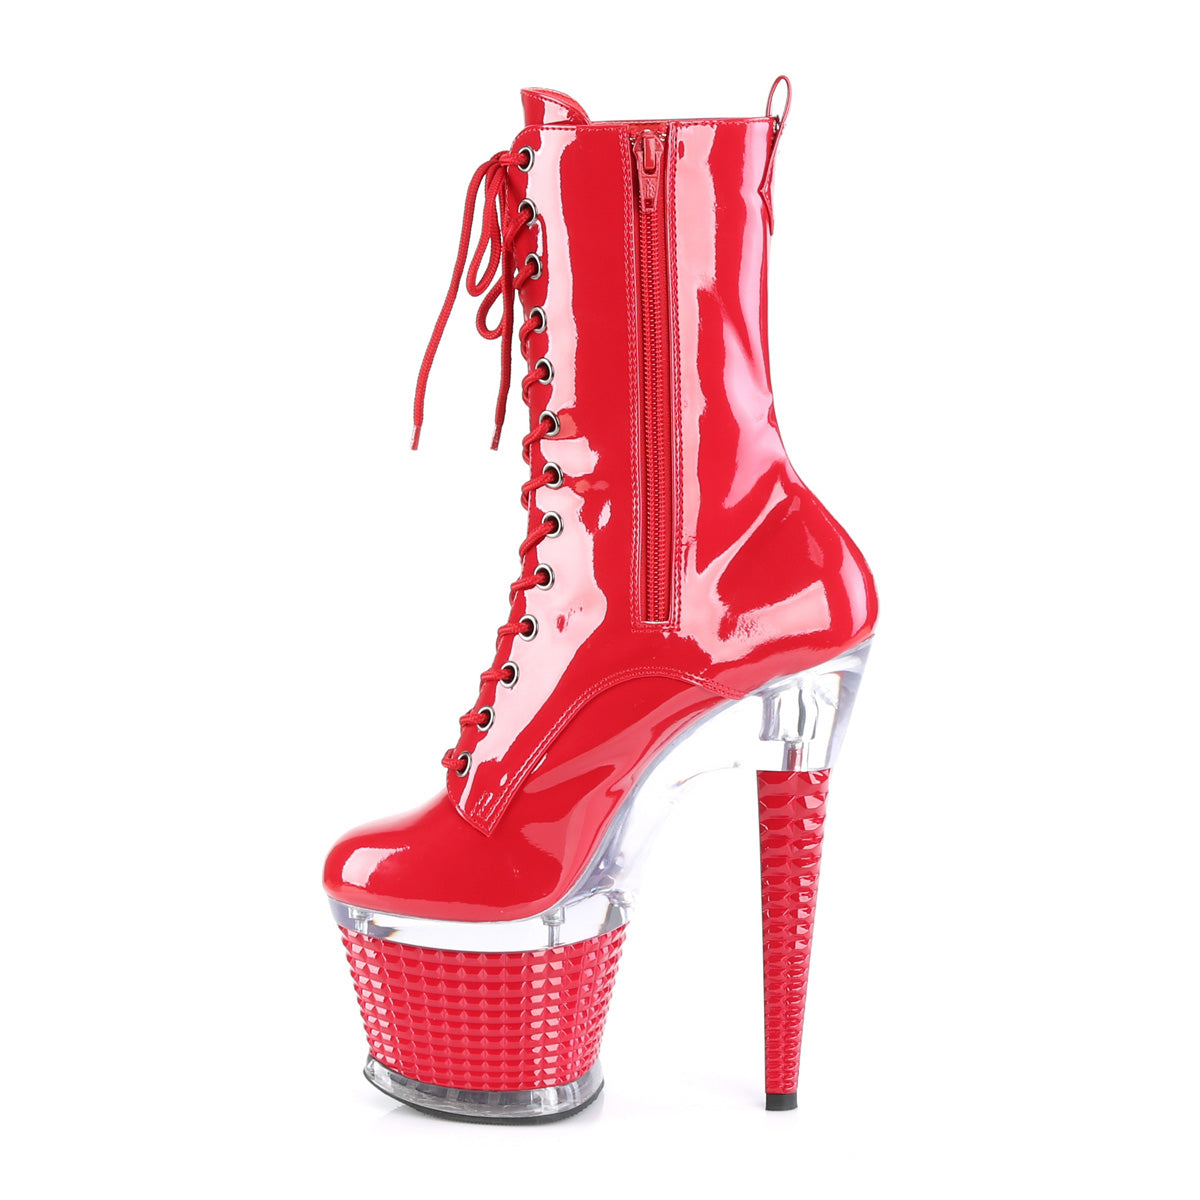 SPECTATOR-1040 Red/Clear Red Ankle Boots